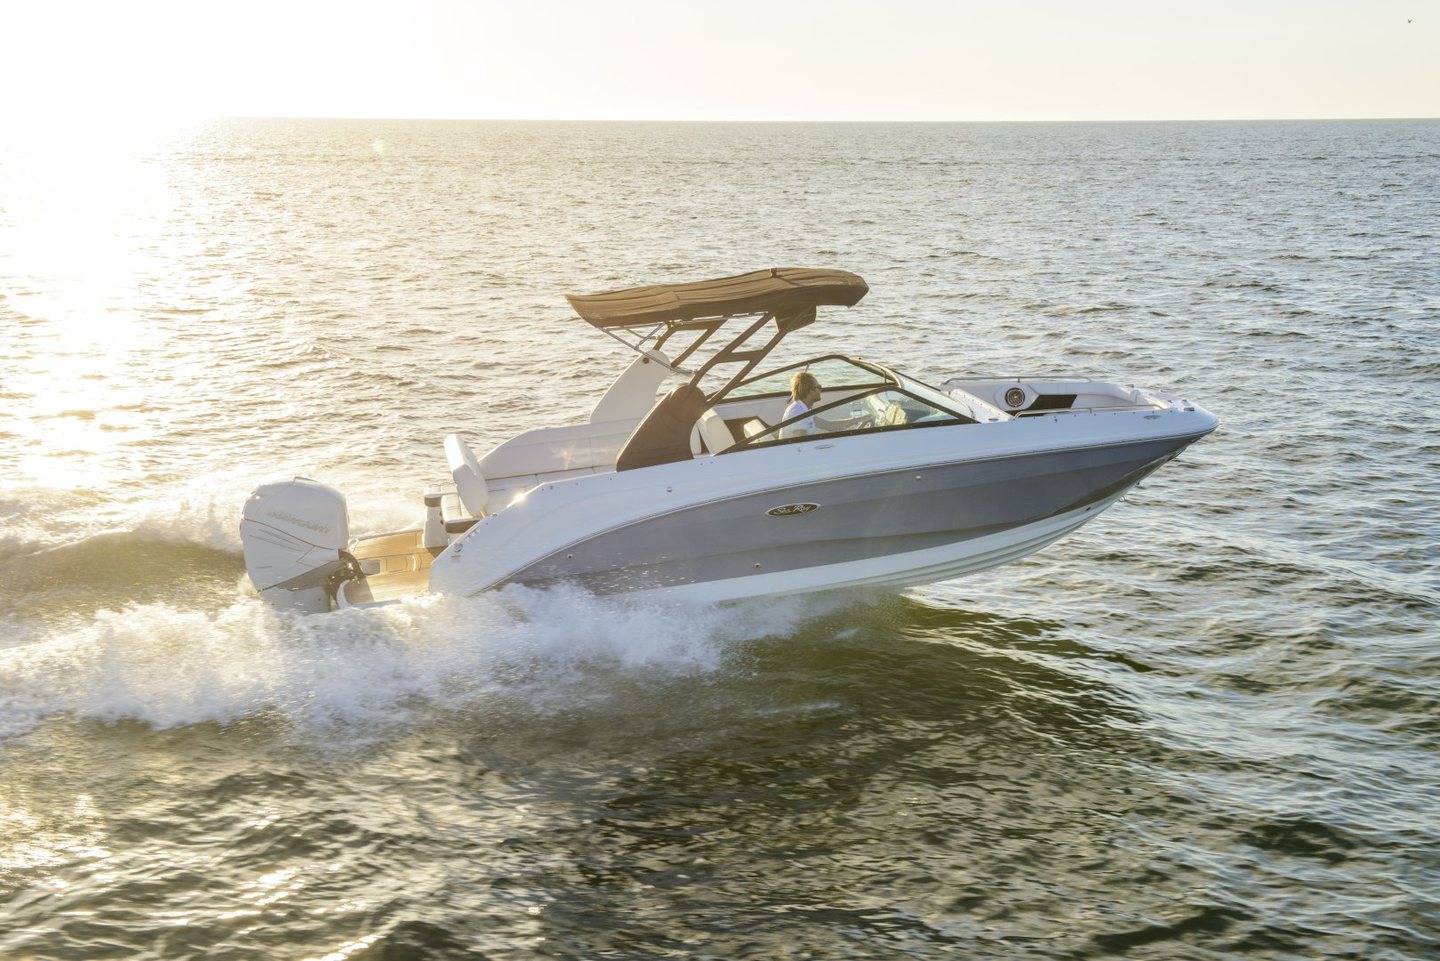 360 VR Virtual Tours of the Sea Ray SDX 250 Outboard